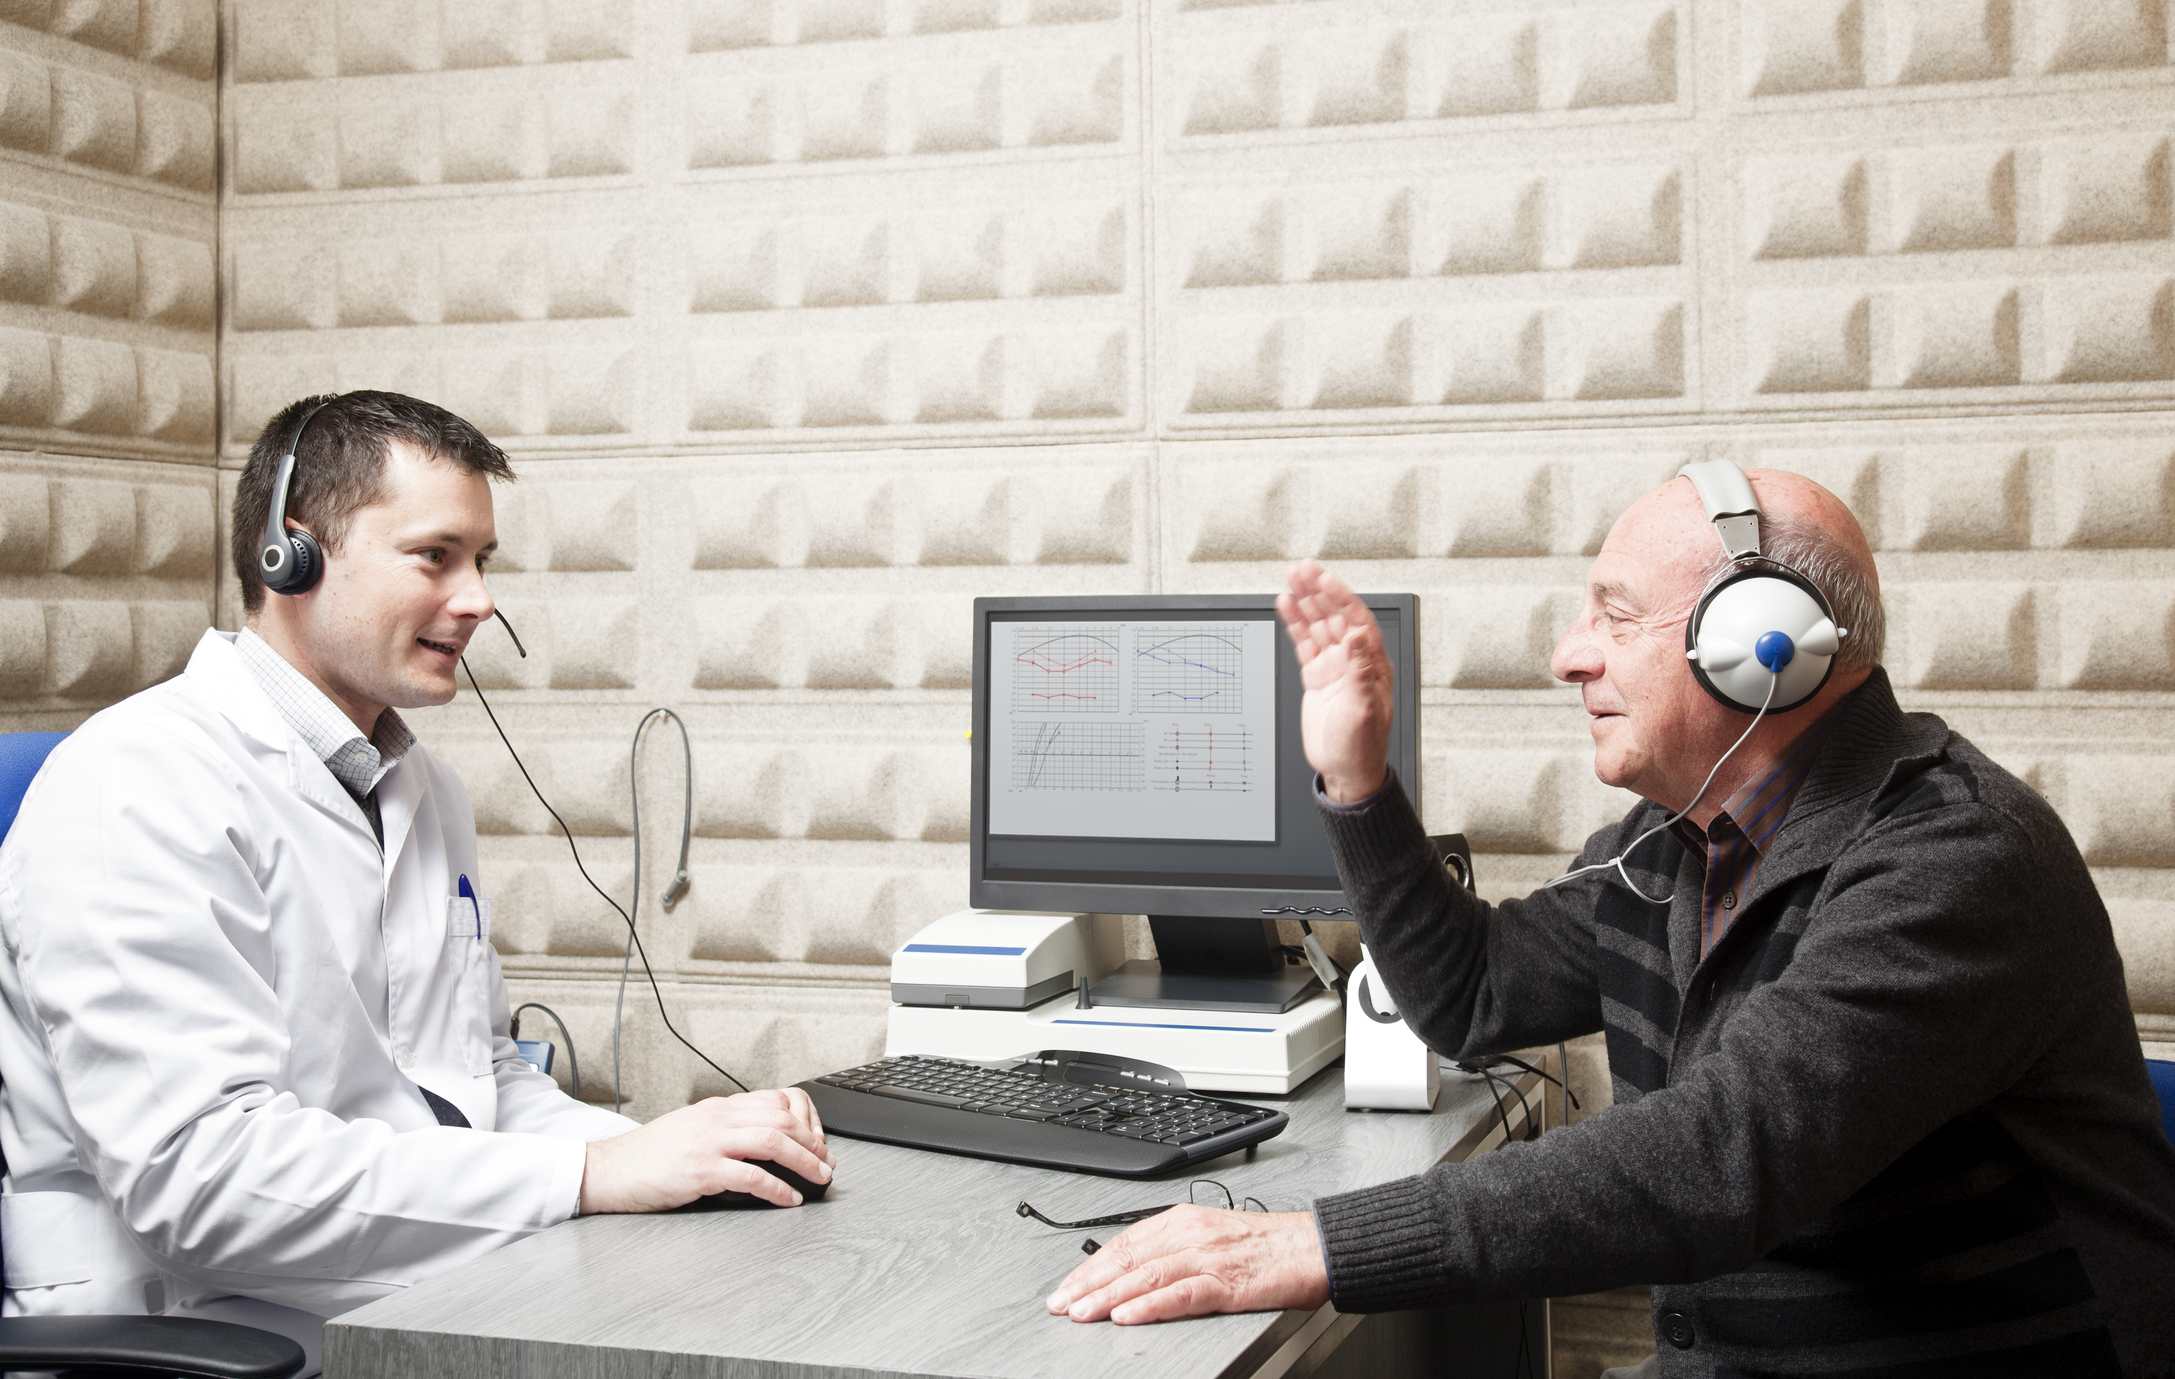 Listen Up! Ear and Hearing Health for Seniors